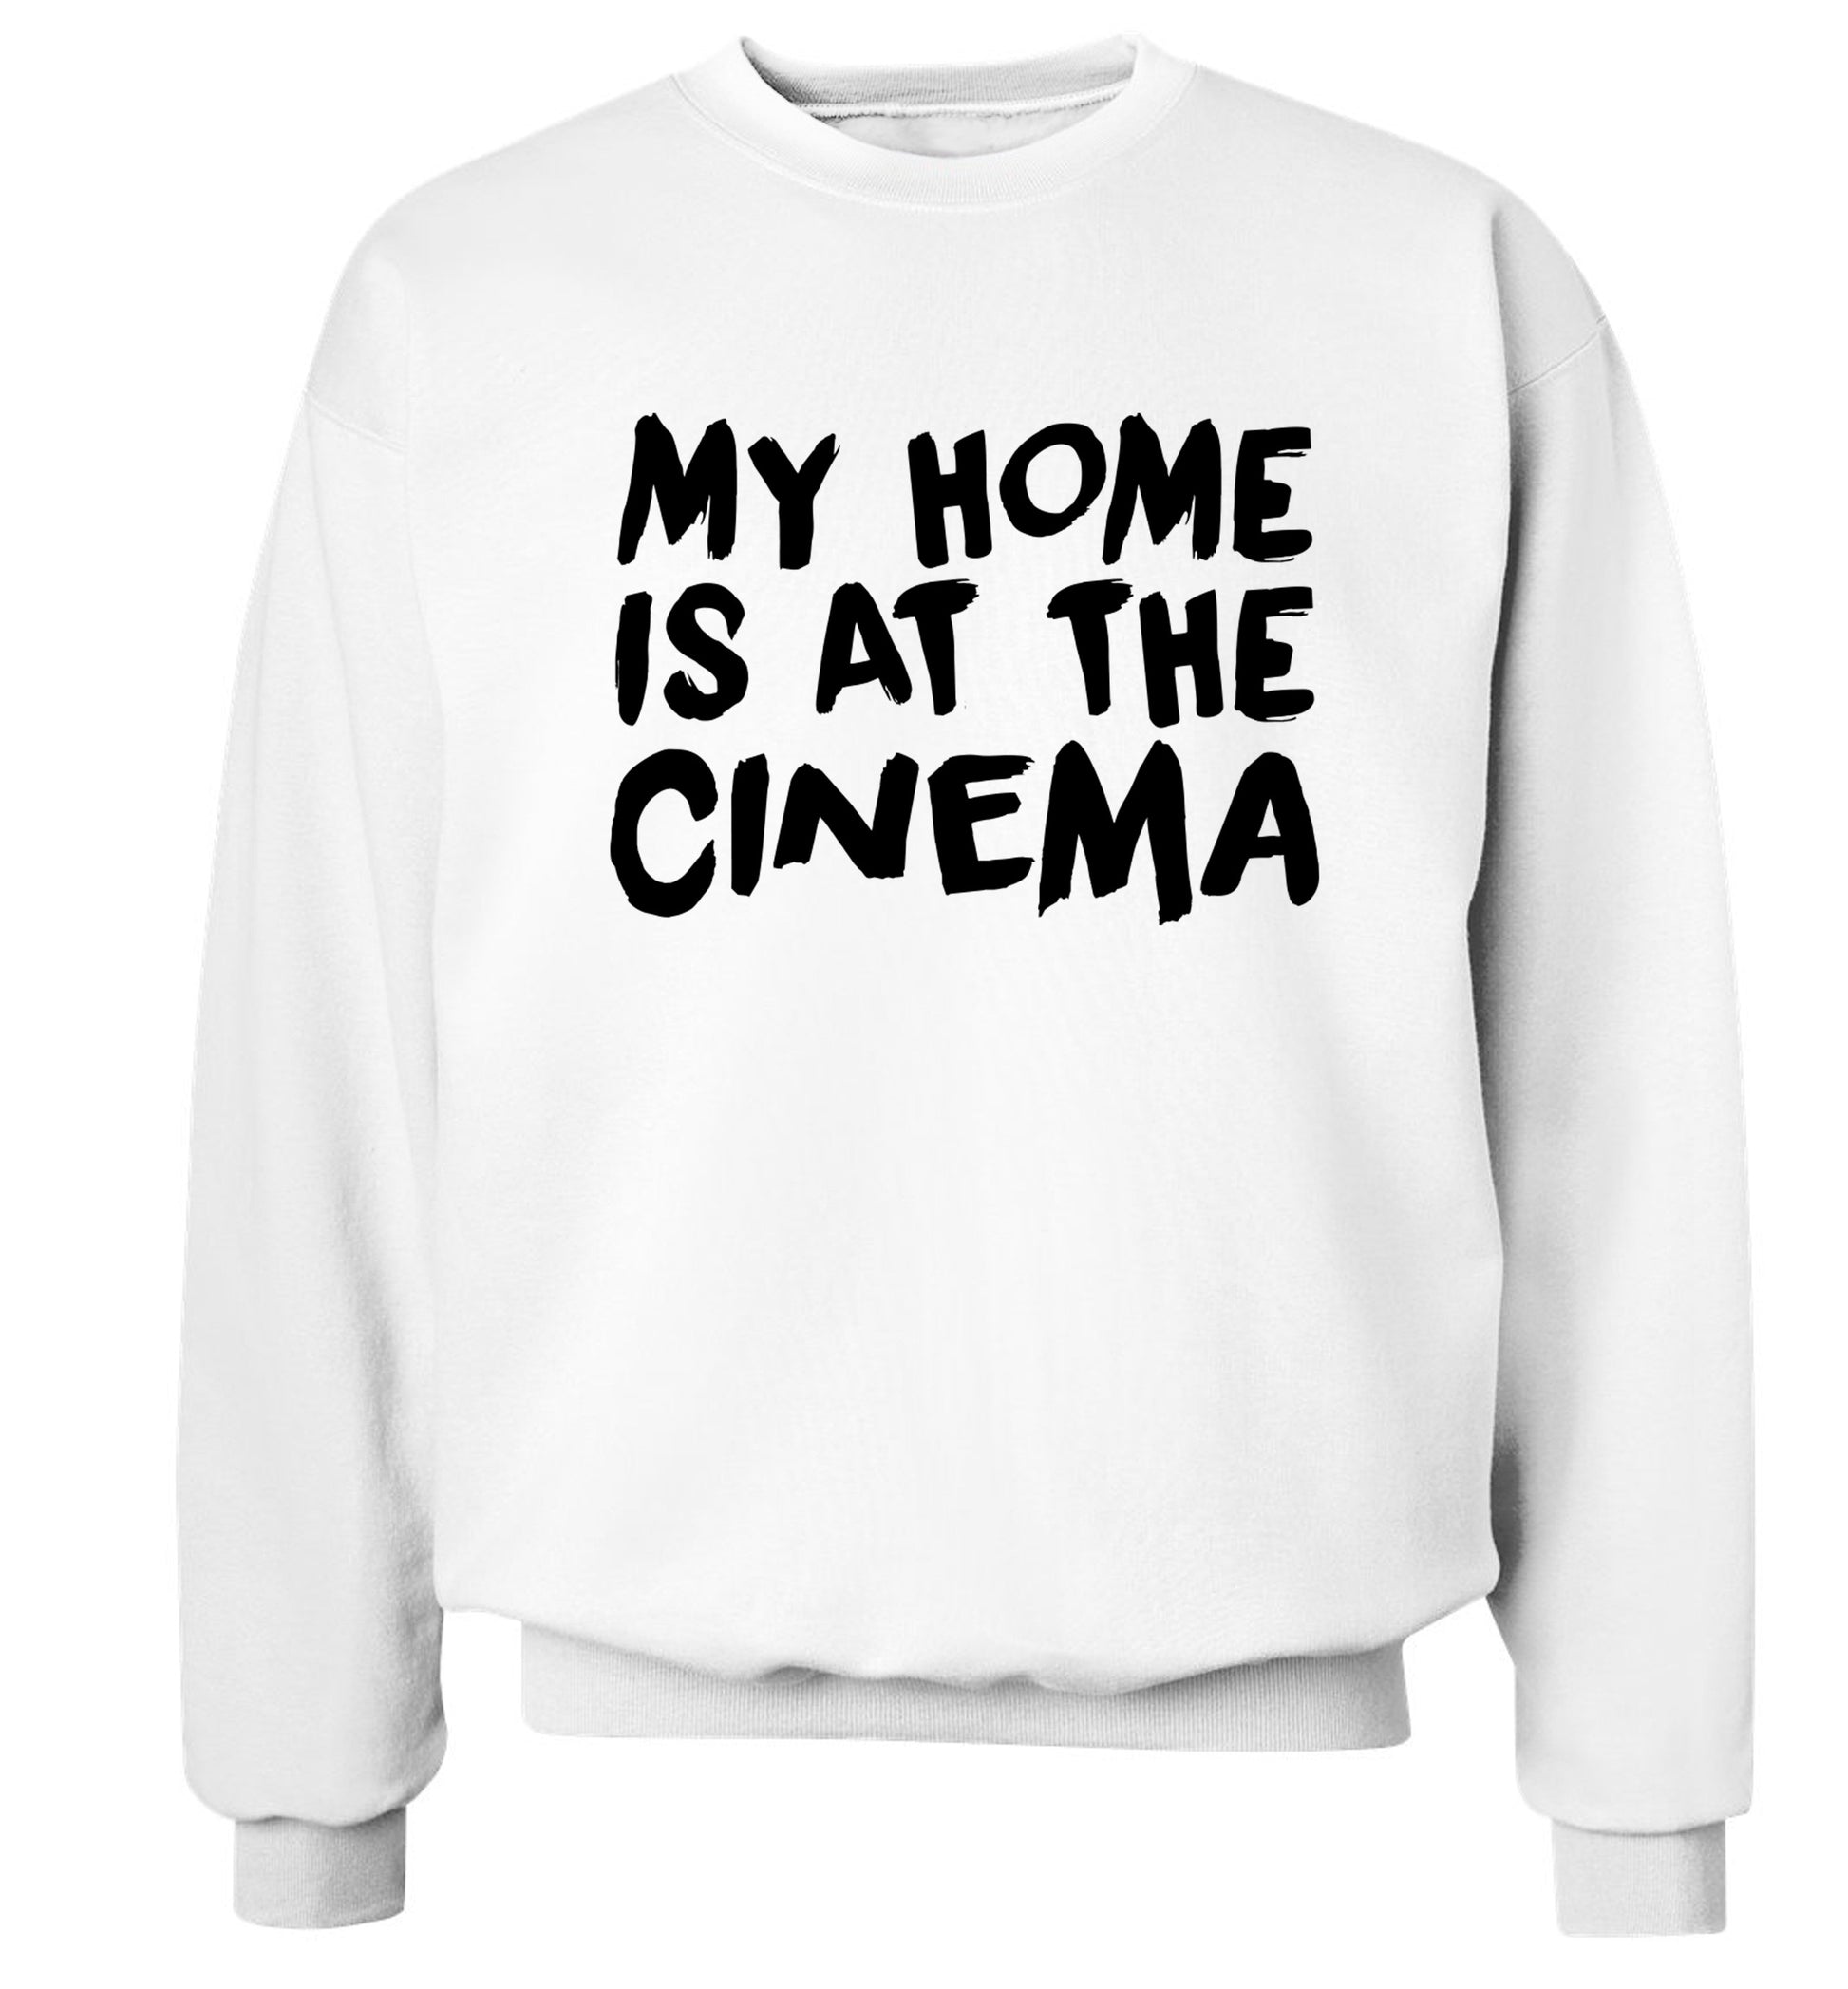 My home is at the cinema Adult's unisex white Sweater 2XL